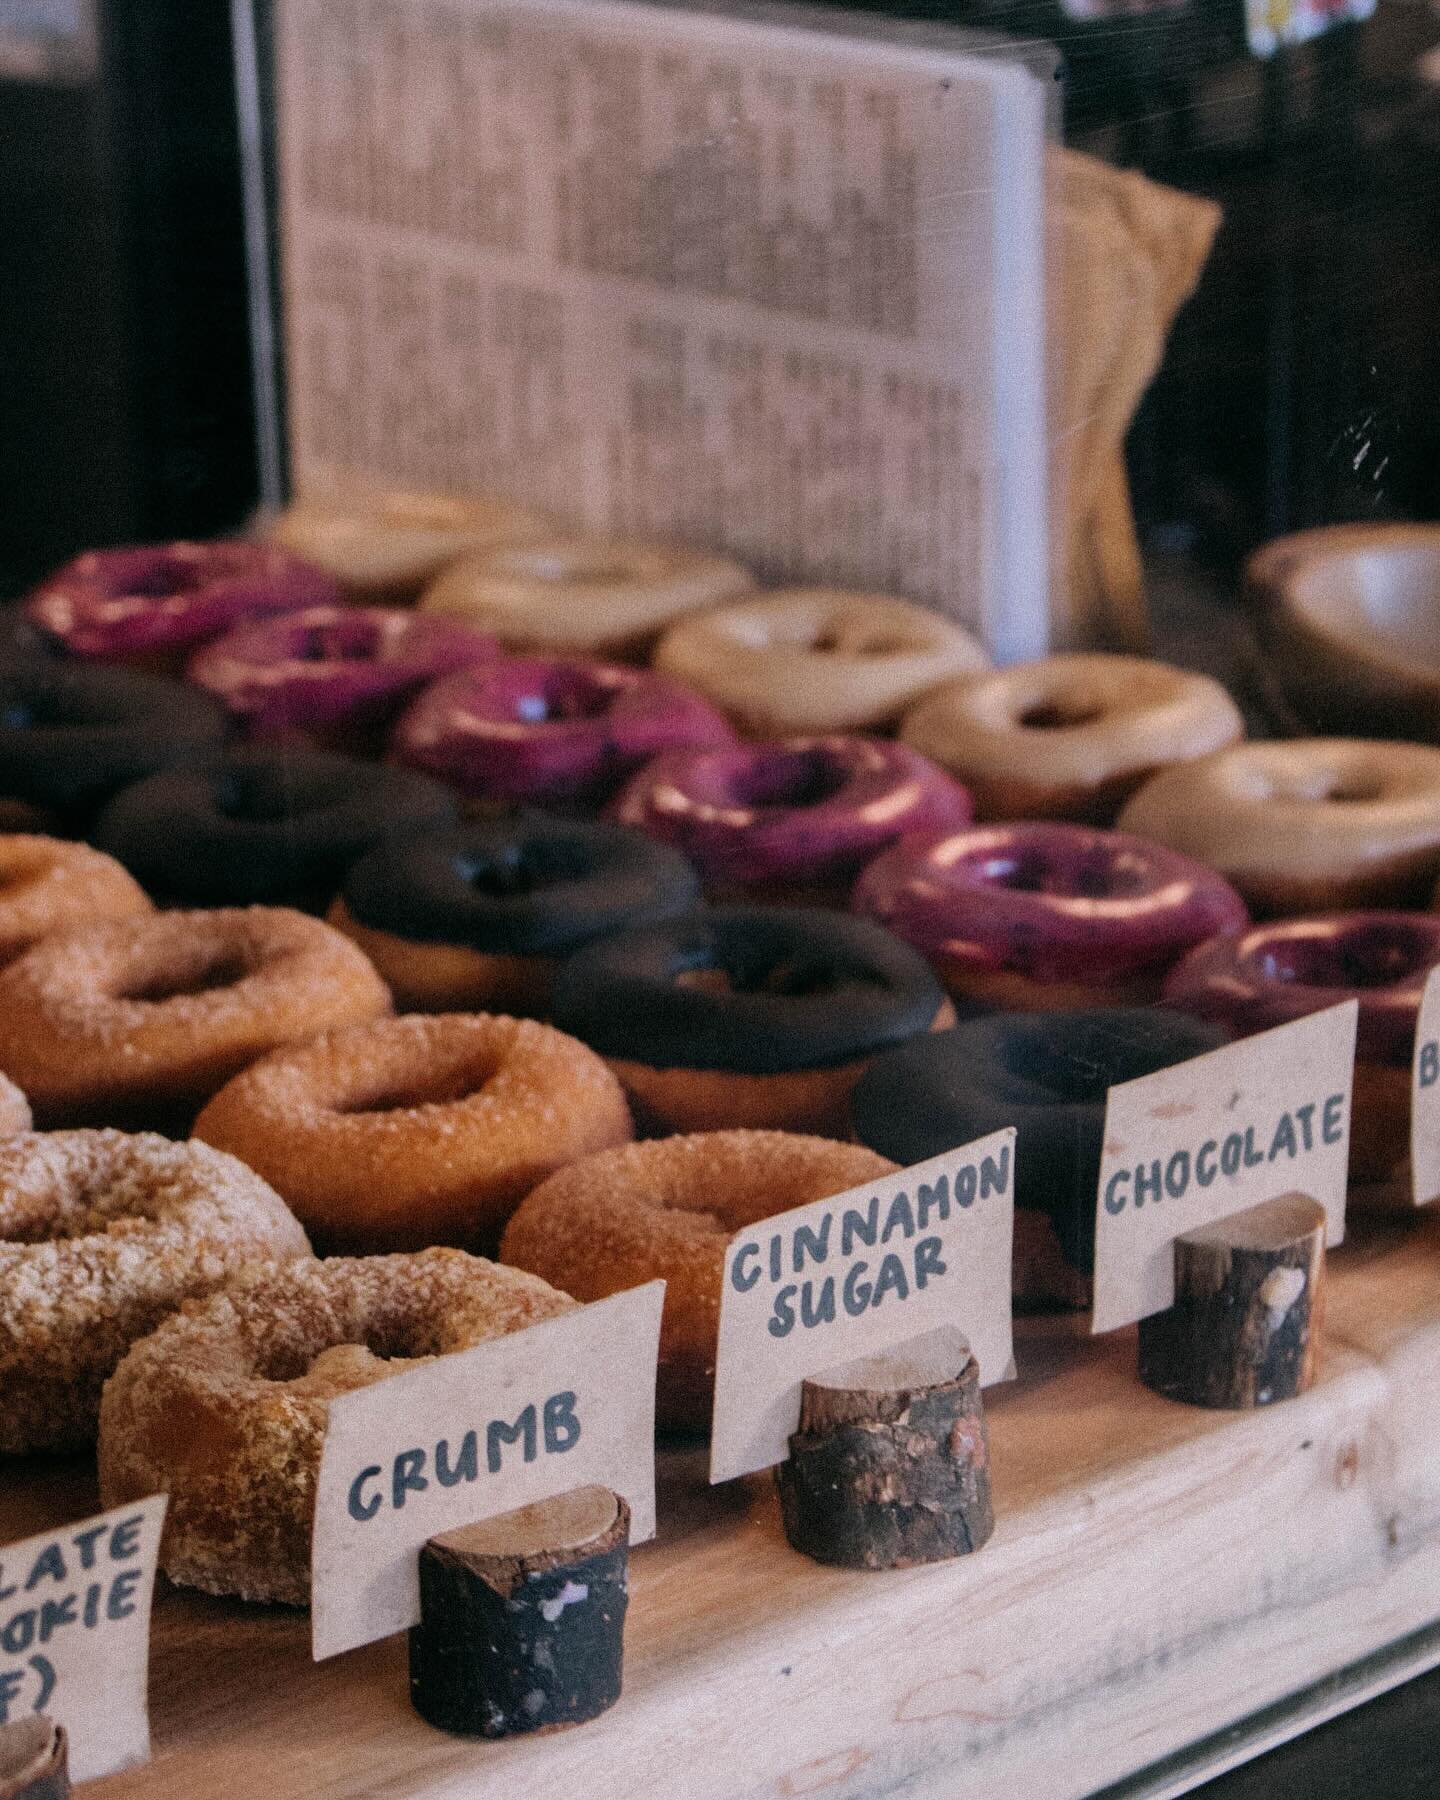 There is nothing like our delicious, undetectably, vegan donuts at our caf&eacute;! ☕️ 🍩
Our wide variety of baked goods is sure to have the perfect one for you! 🫶🏻While not all our donuts are gluten free, we do have a gluten free option which is 